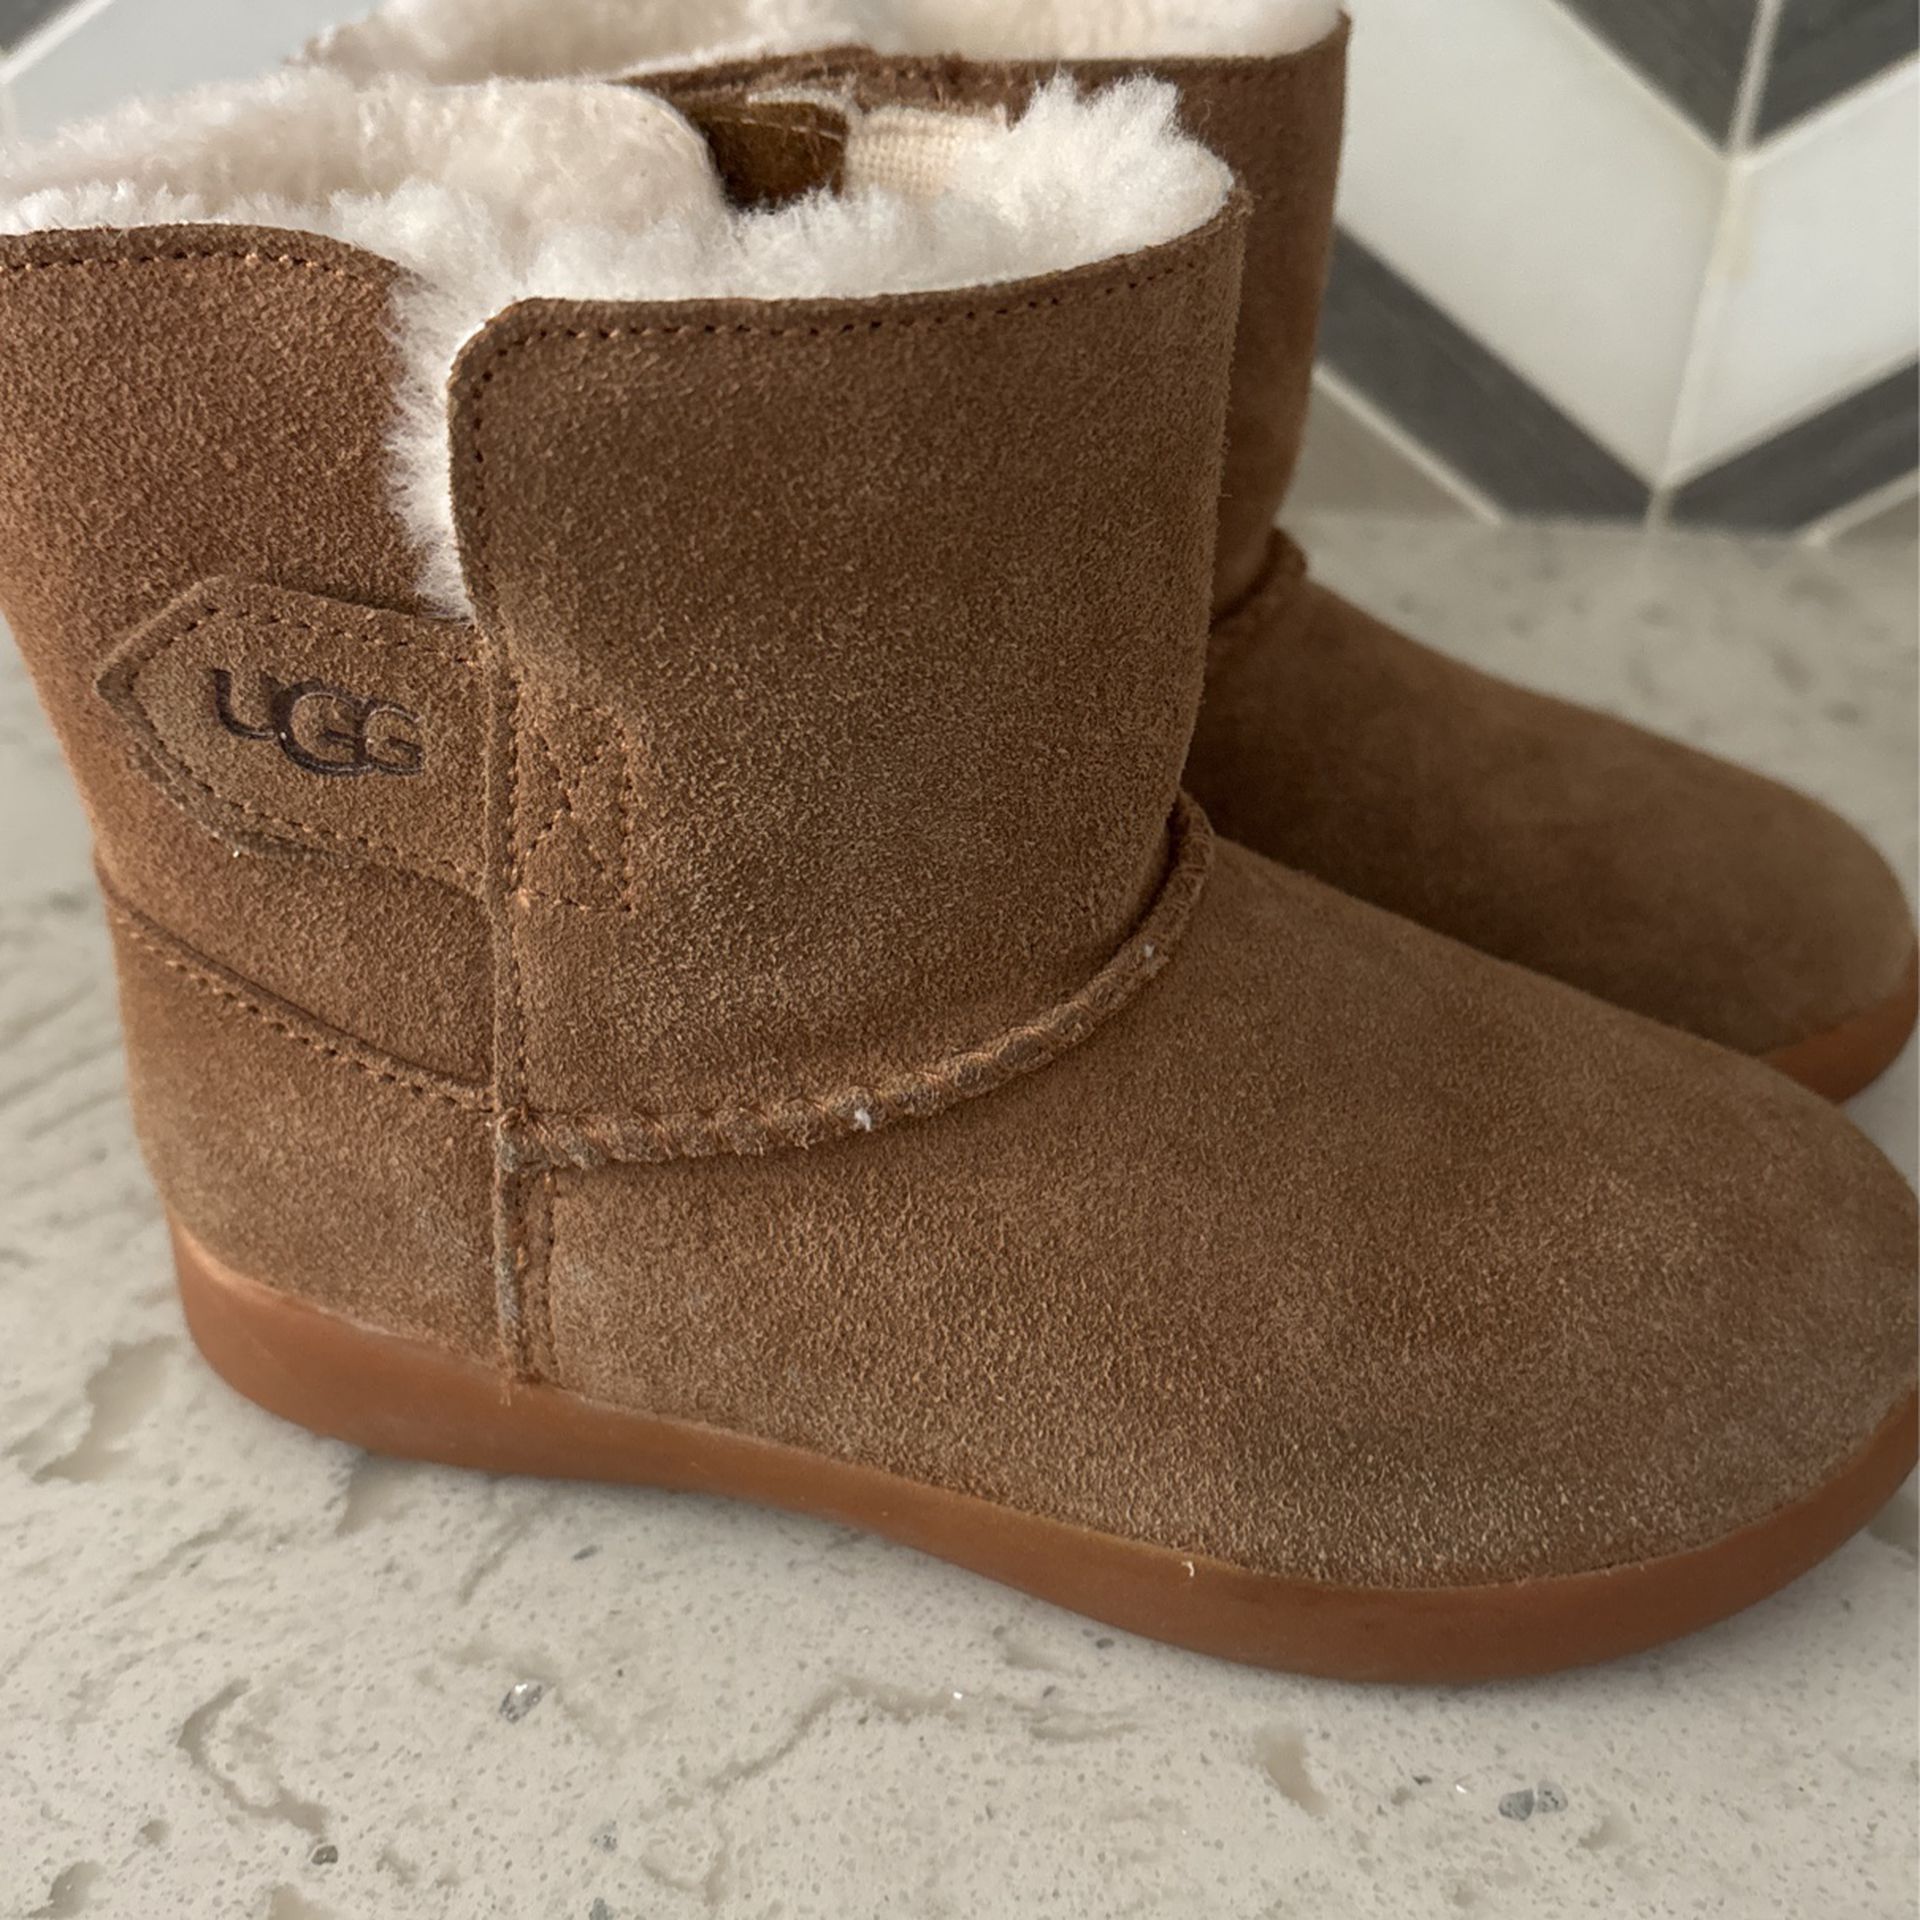 Toddler Ugg Size 9 Boots Girl Lined